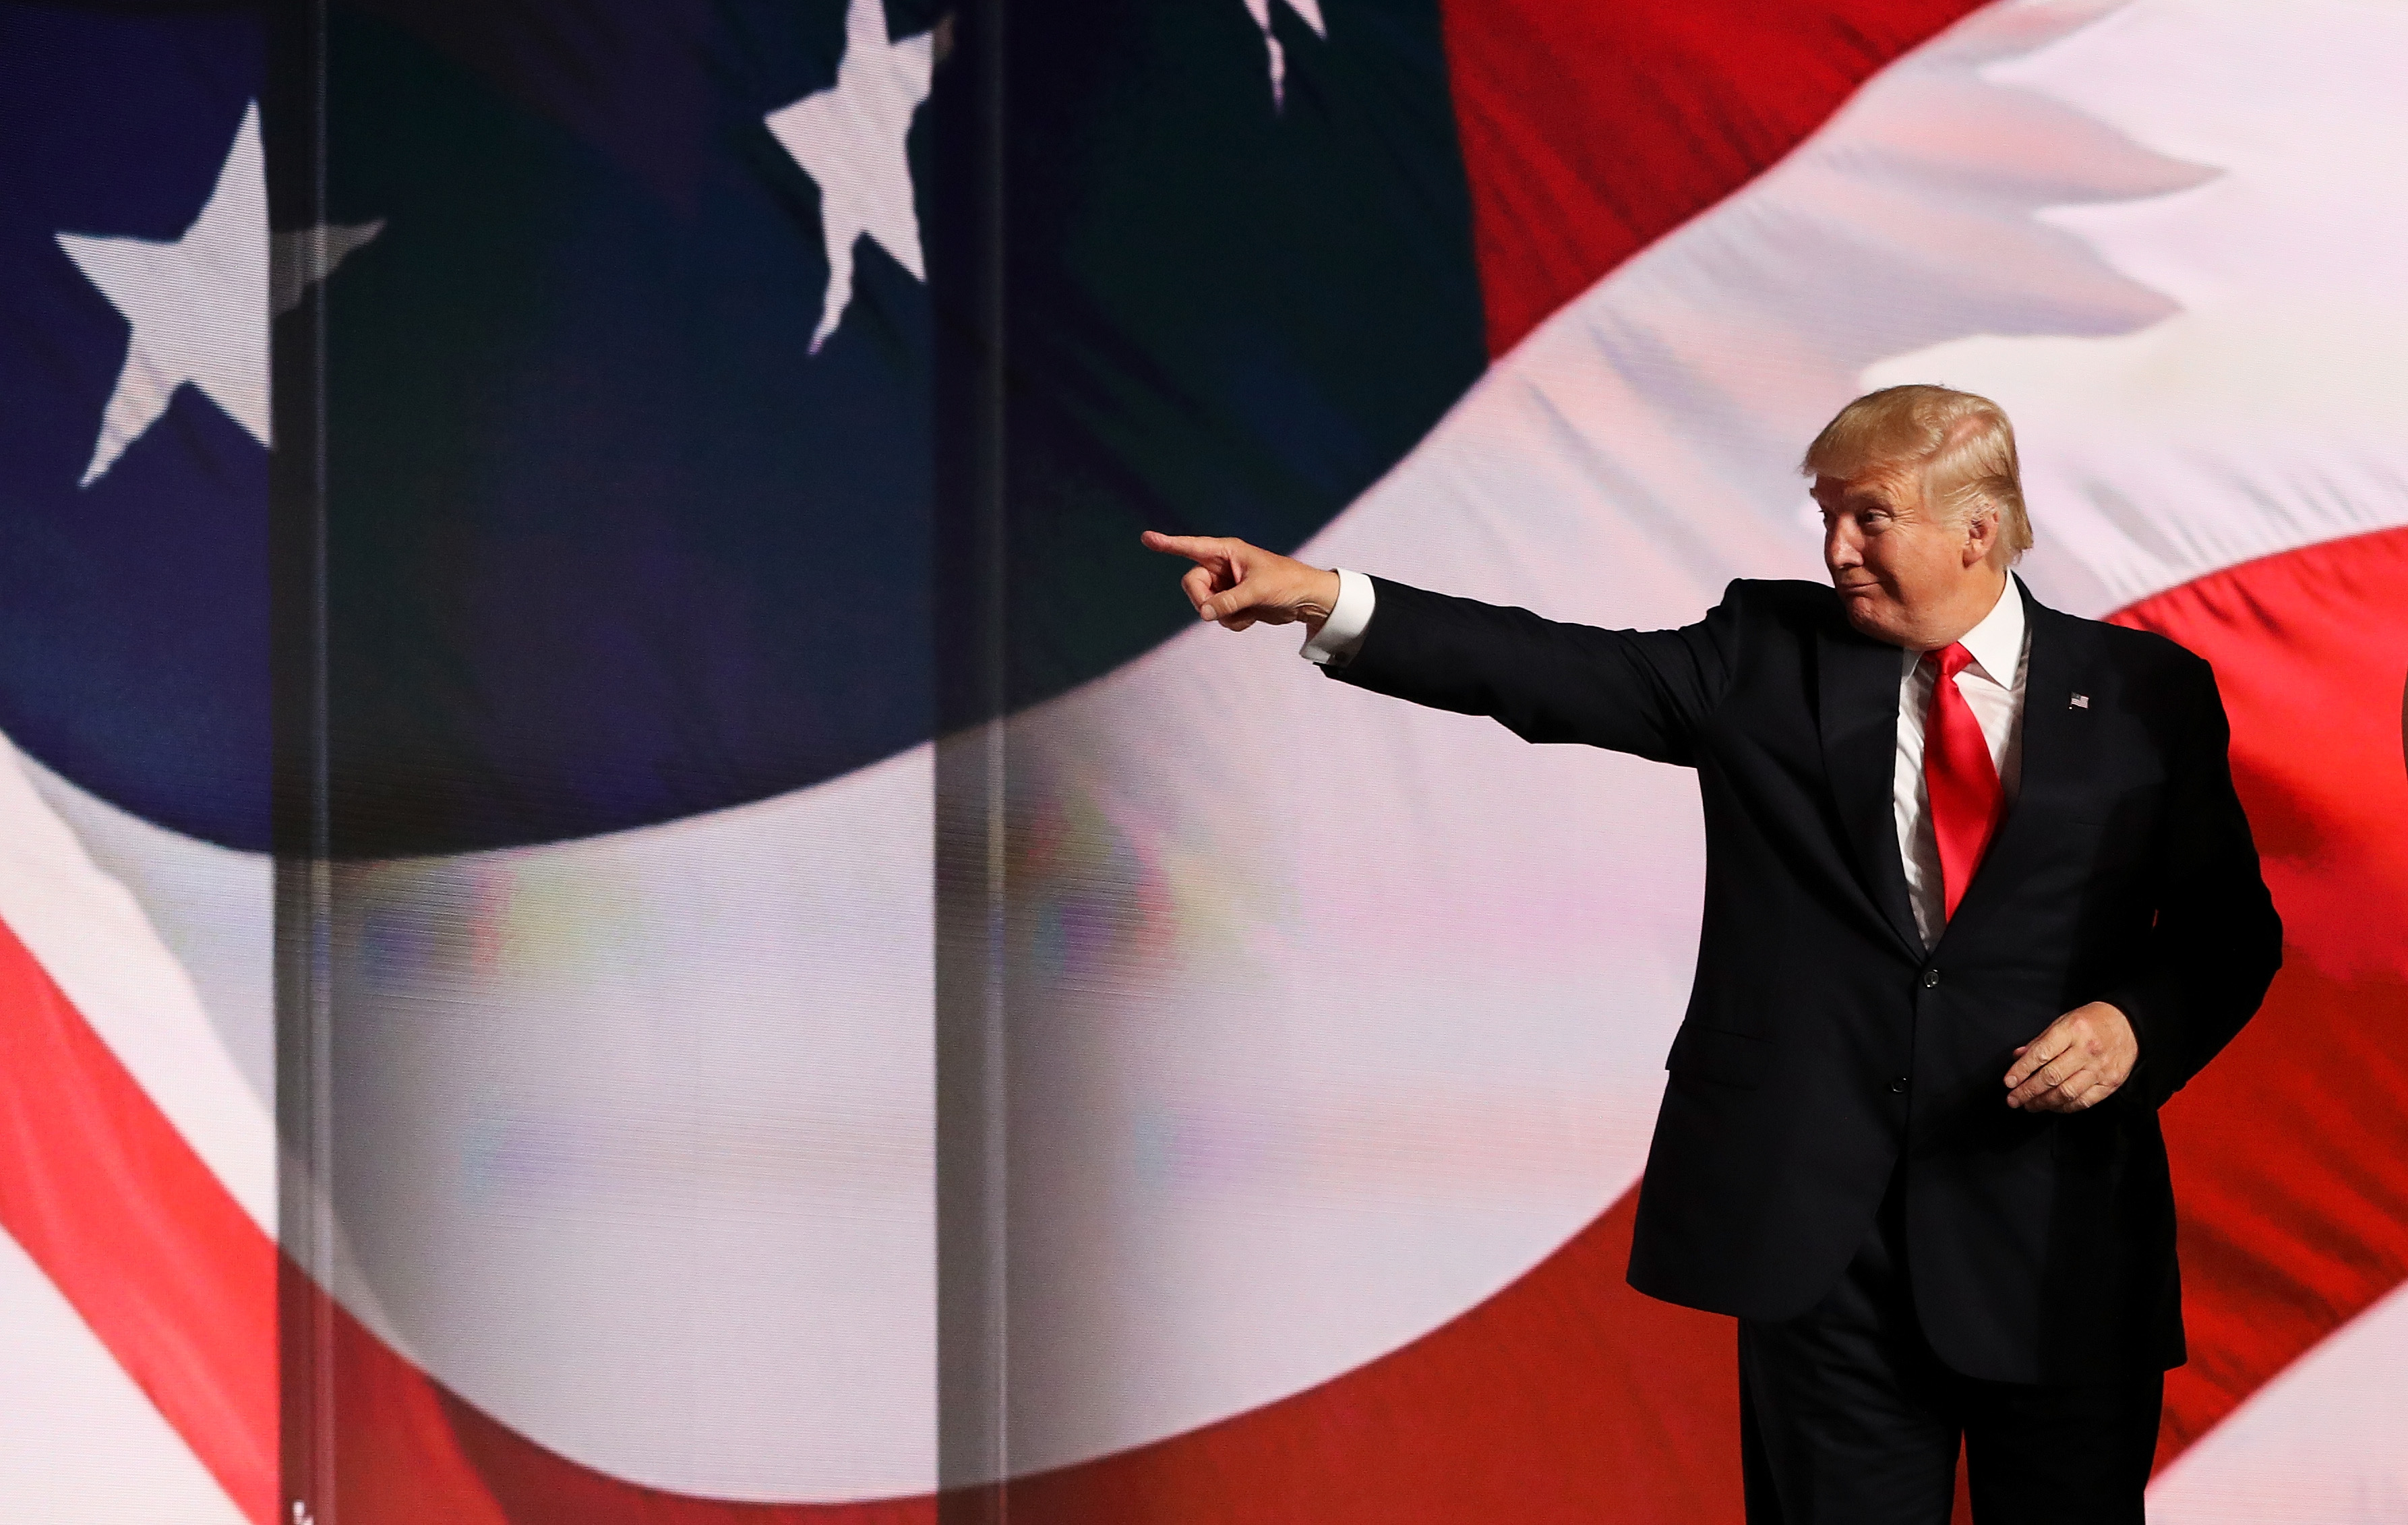 Republican presidential candidate Donald Trump acknowledges the crowd at the end of the Republican National Convention at the Quicken Loans Arena in Cleveland on July 21, 2016.